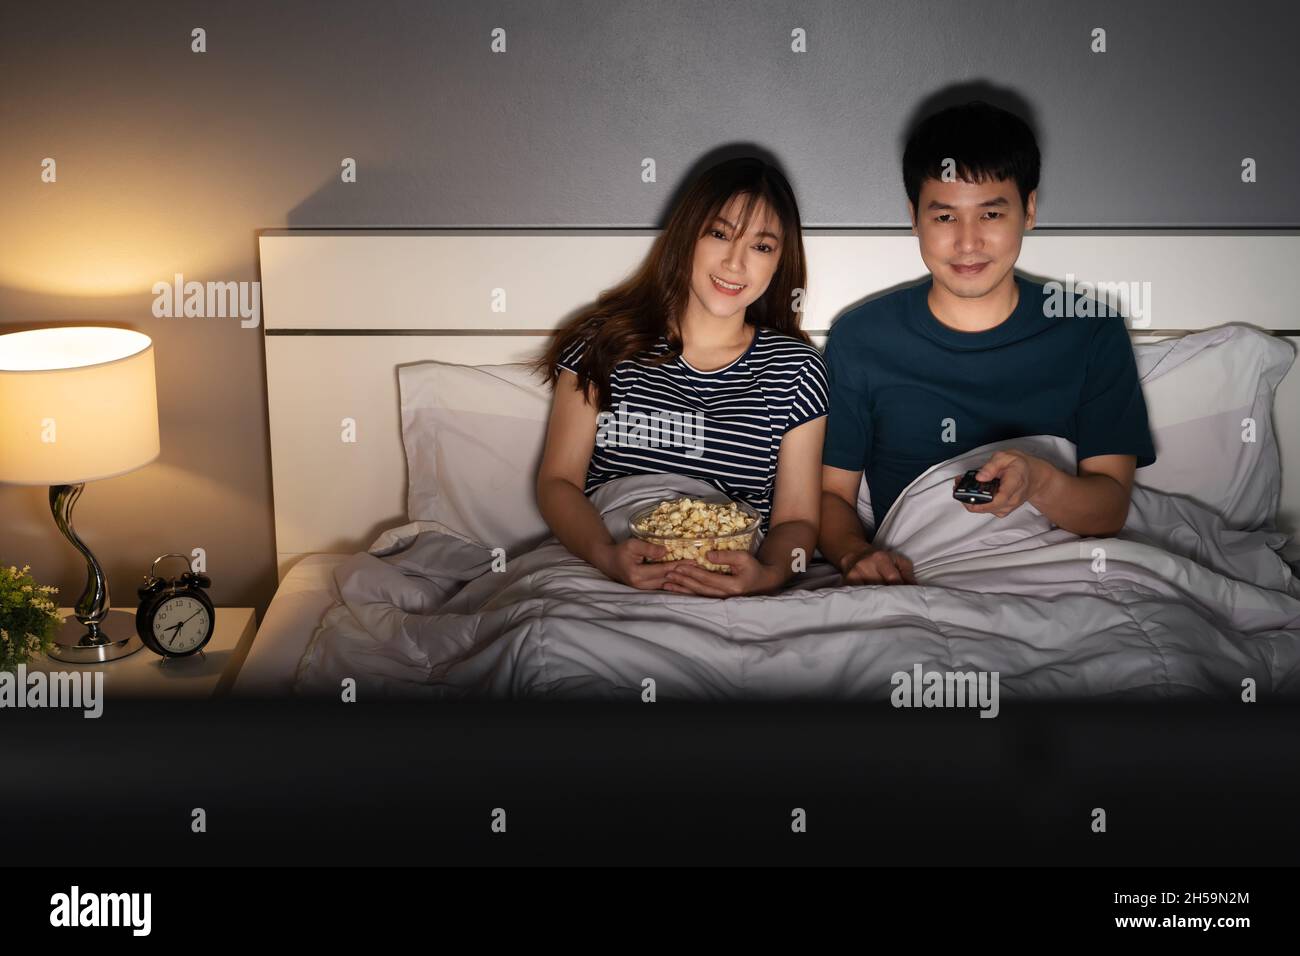 happy young couple watching TV on a bed at night Stock Photo